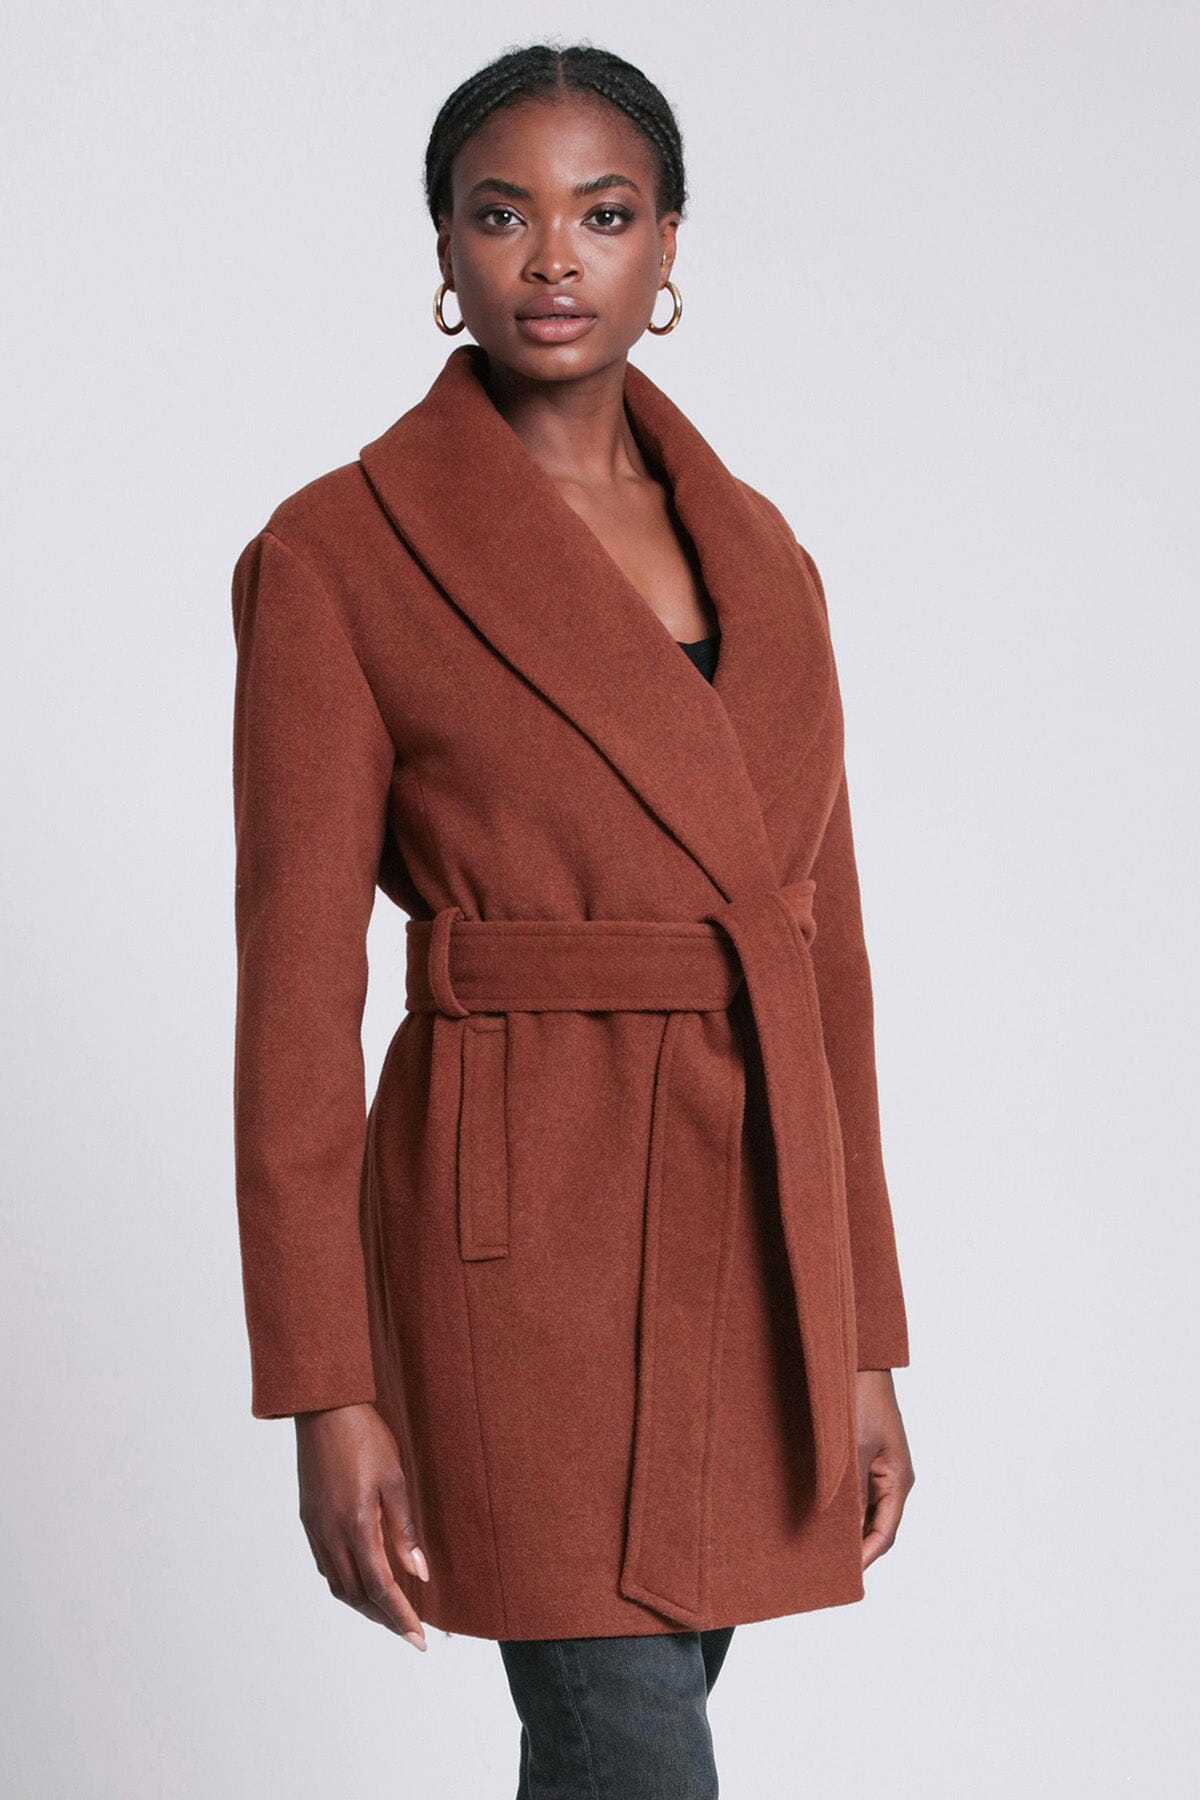 Cinnamon brown wool blend belted shawl collar peacoat coat - women's figure flattering outerwear for fall 2023